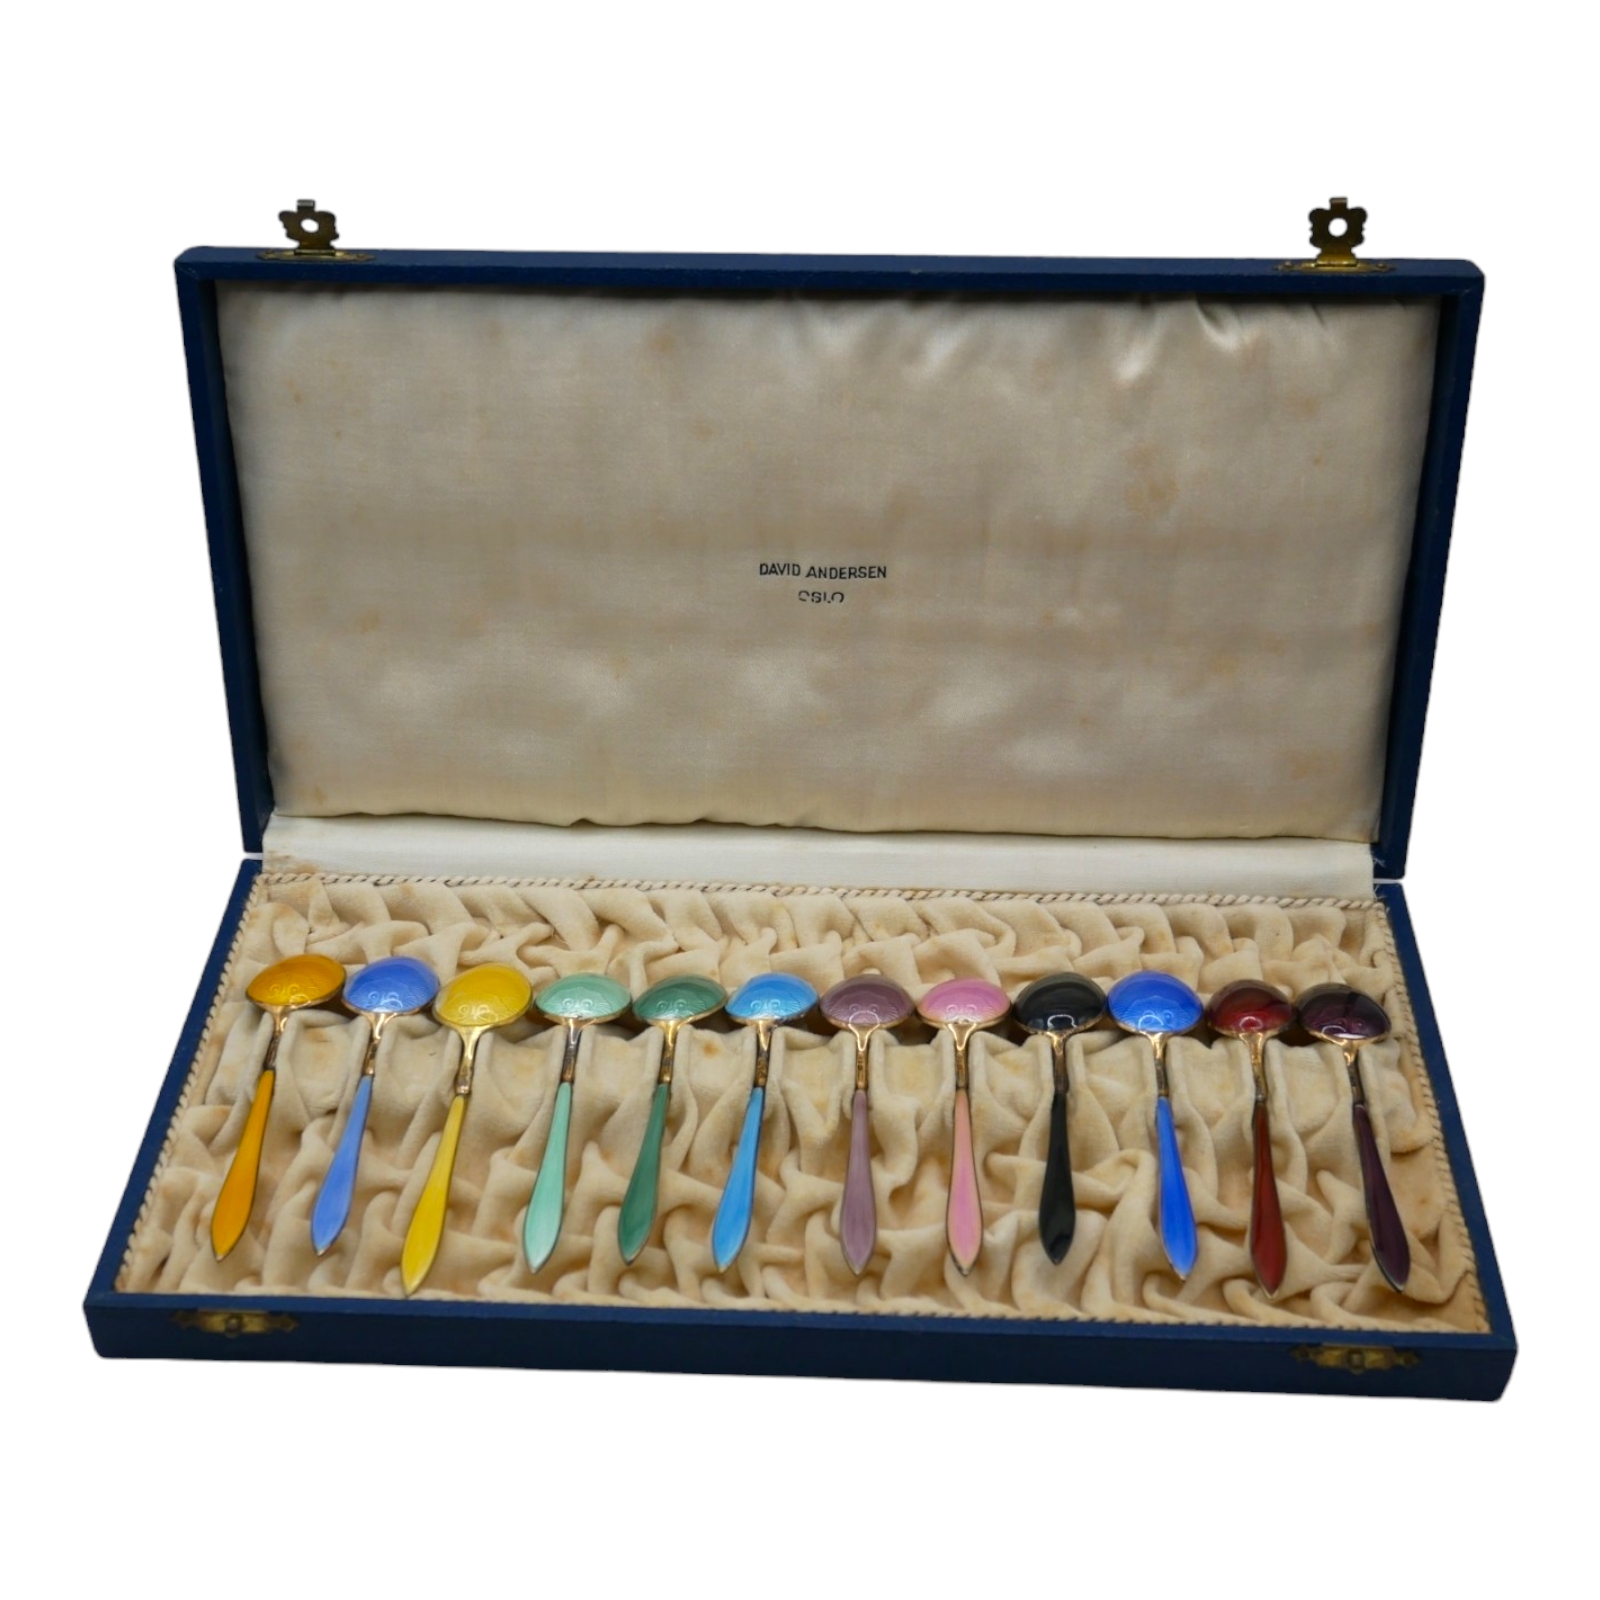 DAVID ANDERSON, OSLO, A 20TH CENTURY CASED SET OF TWELVE DANISH STERLING SILVER GILT AND ENAMEL